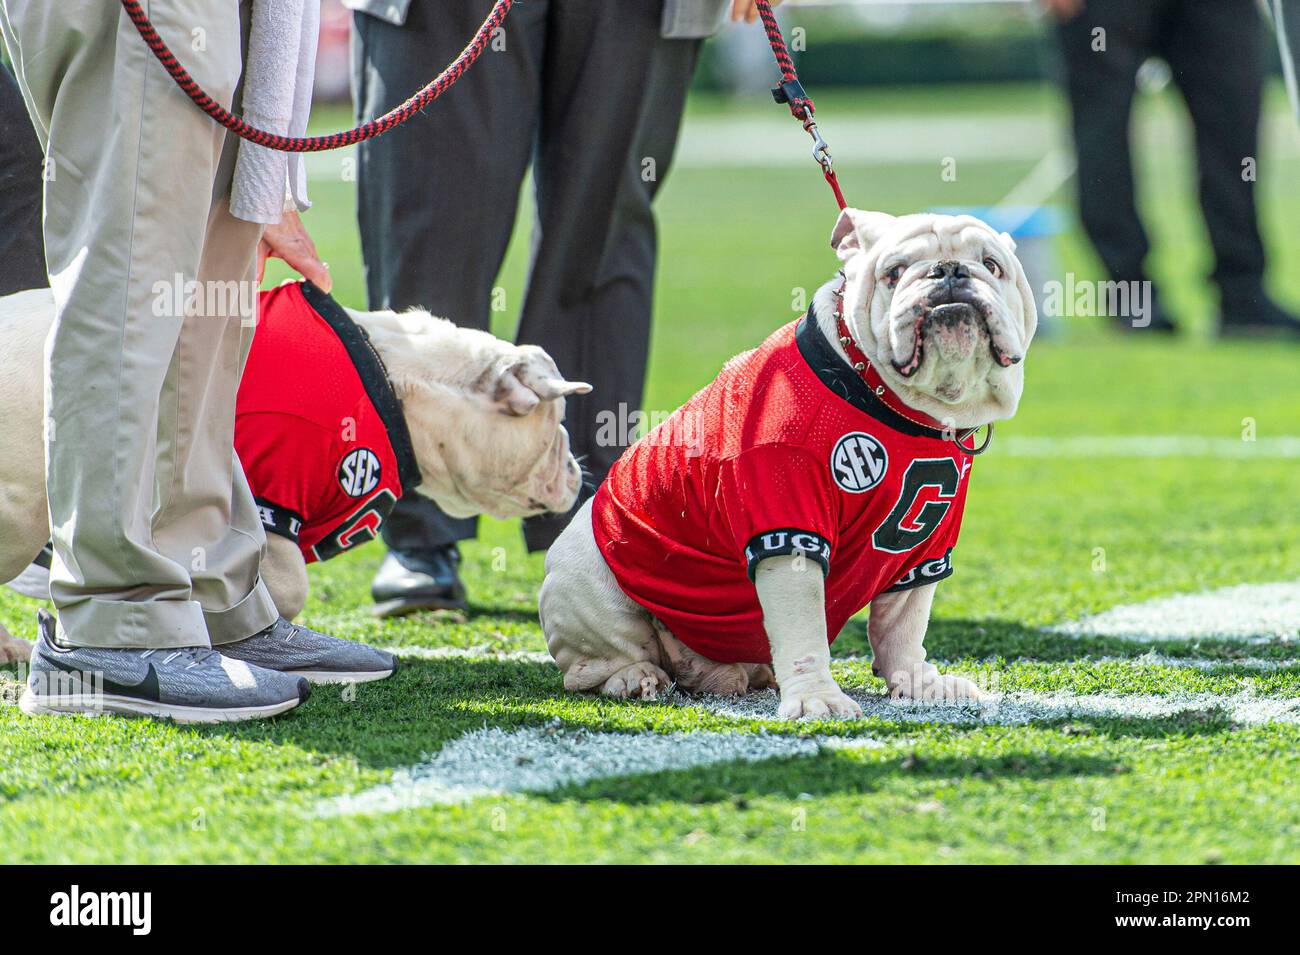 ATHENS, GA - APRIL 15: Que, also known as Uga X, looks over his shoulder as  Boom, or Uga XI, comes onto the field during the retirement ceremony for Uga  X and